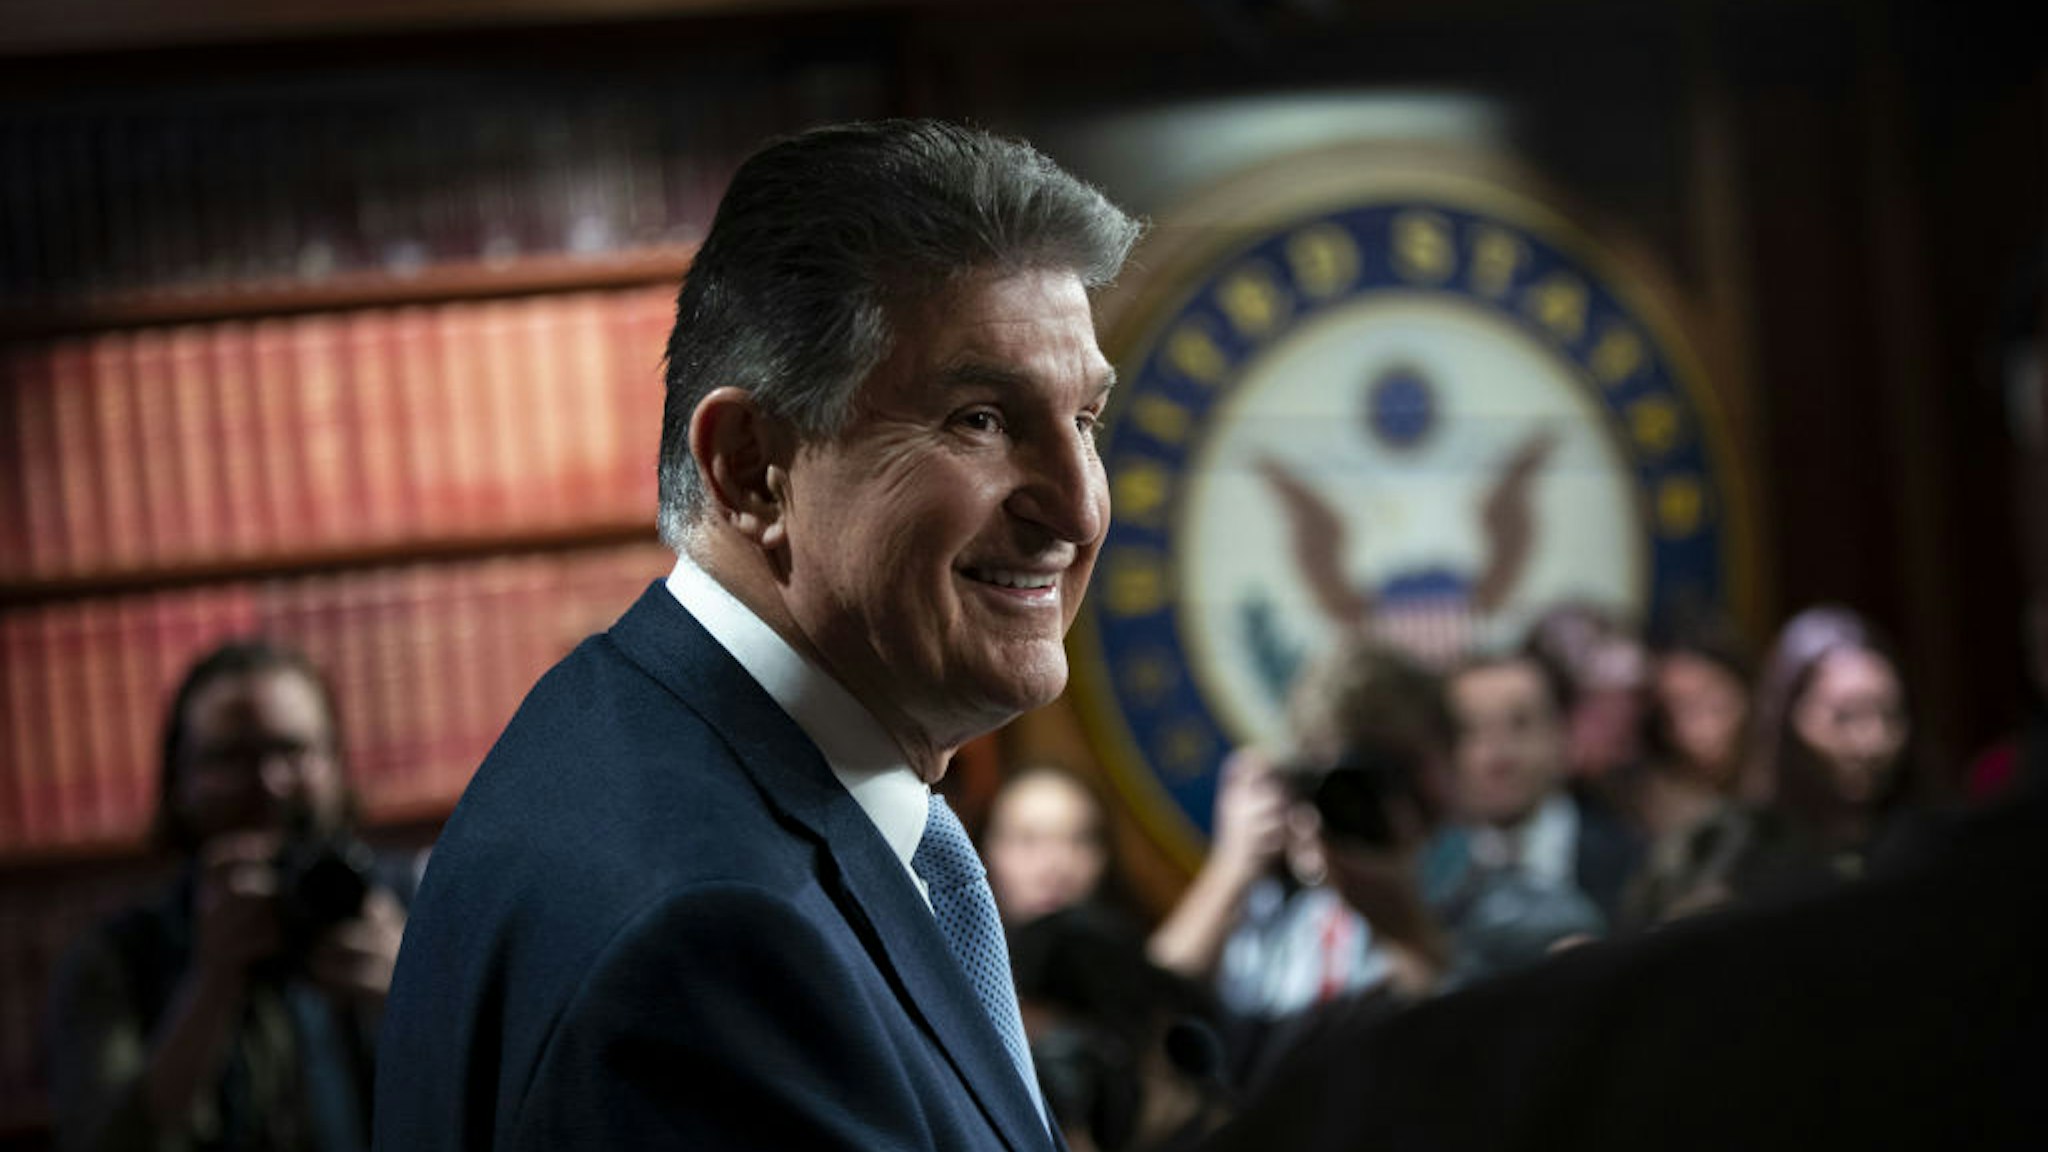 Senator Joe Manchin, a Democrat from West Virginia, smiles while speaking during a news conference about a bill to ban Russian energy imports, at the U.S. Capitol in Washington, D.C., U.S., on Thursday, March 3, 2022. The White House is asking Congress for $32.5 billion in emergency funding to boost its response to Russia's invasion of Ukraine and tackle the ongoing fight against the coronavirus. Photographer: Al Drago/Bloomberg via Getty Images